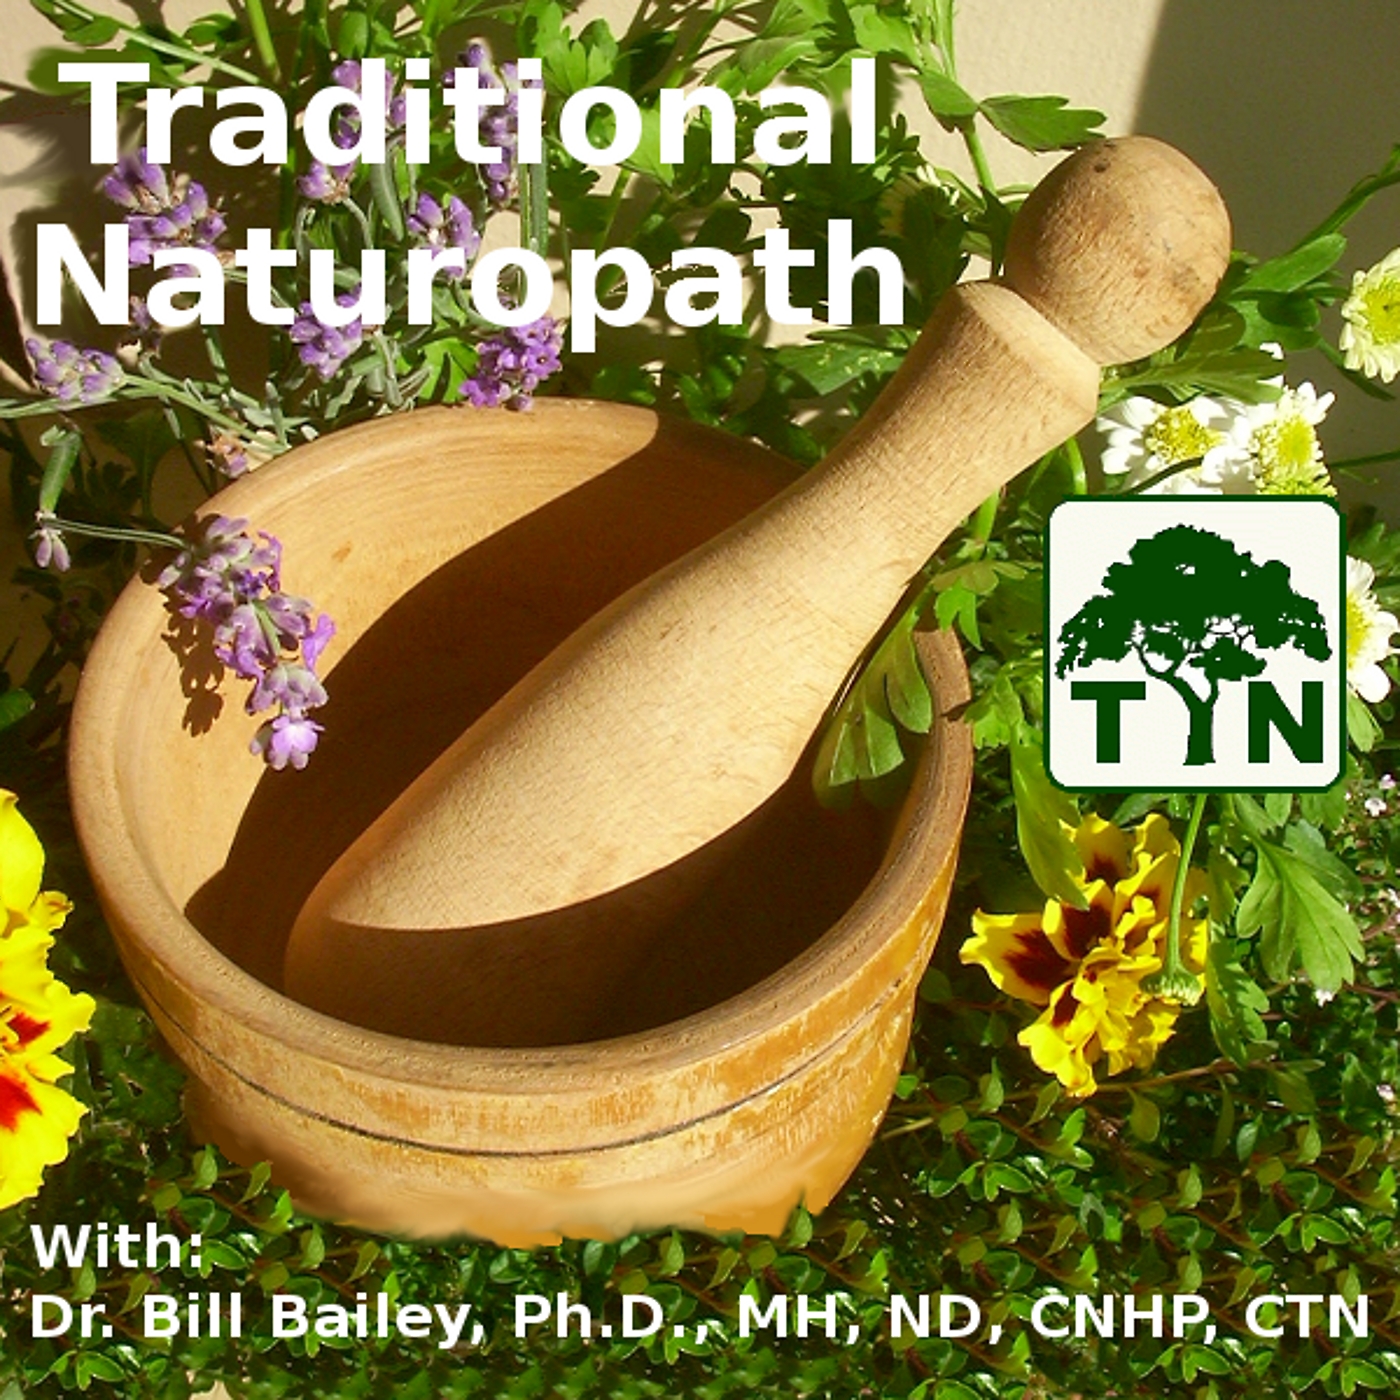 The Traditional Naturopath